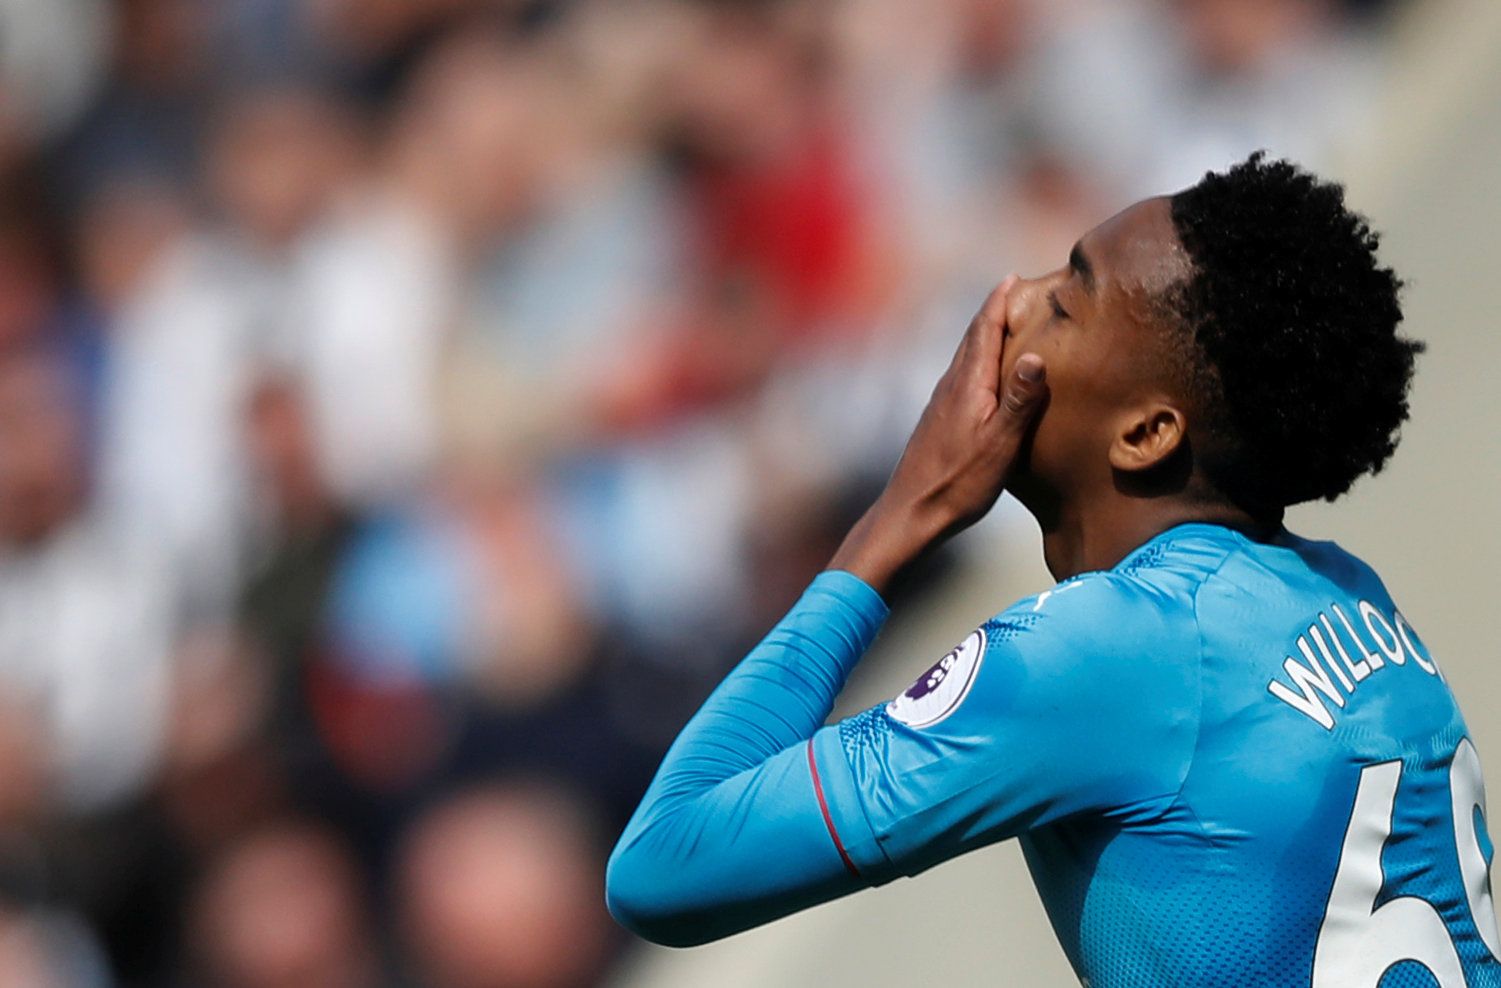 Soccer Football - Premier League - Newcastle United vs Arsenal - St James' Park, Newcastle, Britain - April 15, 2018   Arsenal's Joseph Willock reacts after missing a chance to score           Action Images via Reuters/Carl Recine    EDITORIAL USE ONLY. No use with unauthorized audio, video, data, fixture lists, club/league logos or 